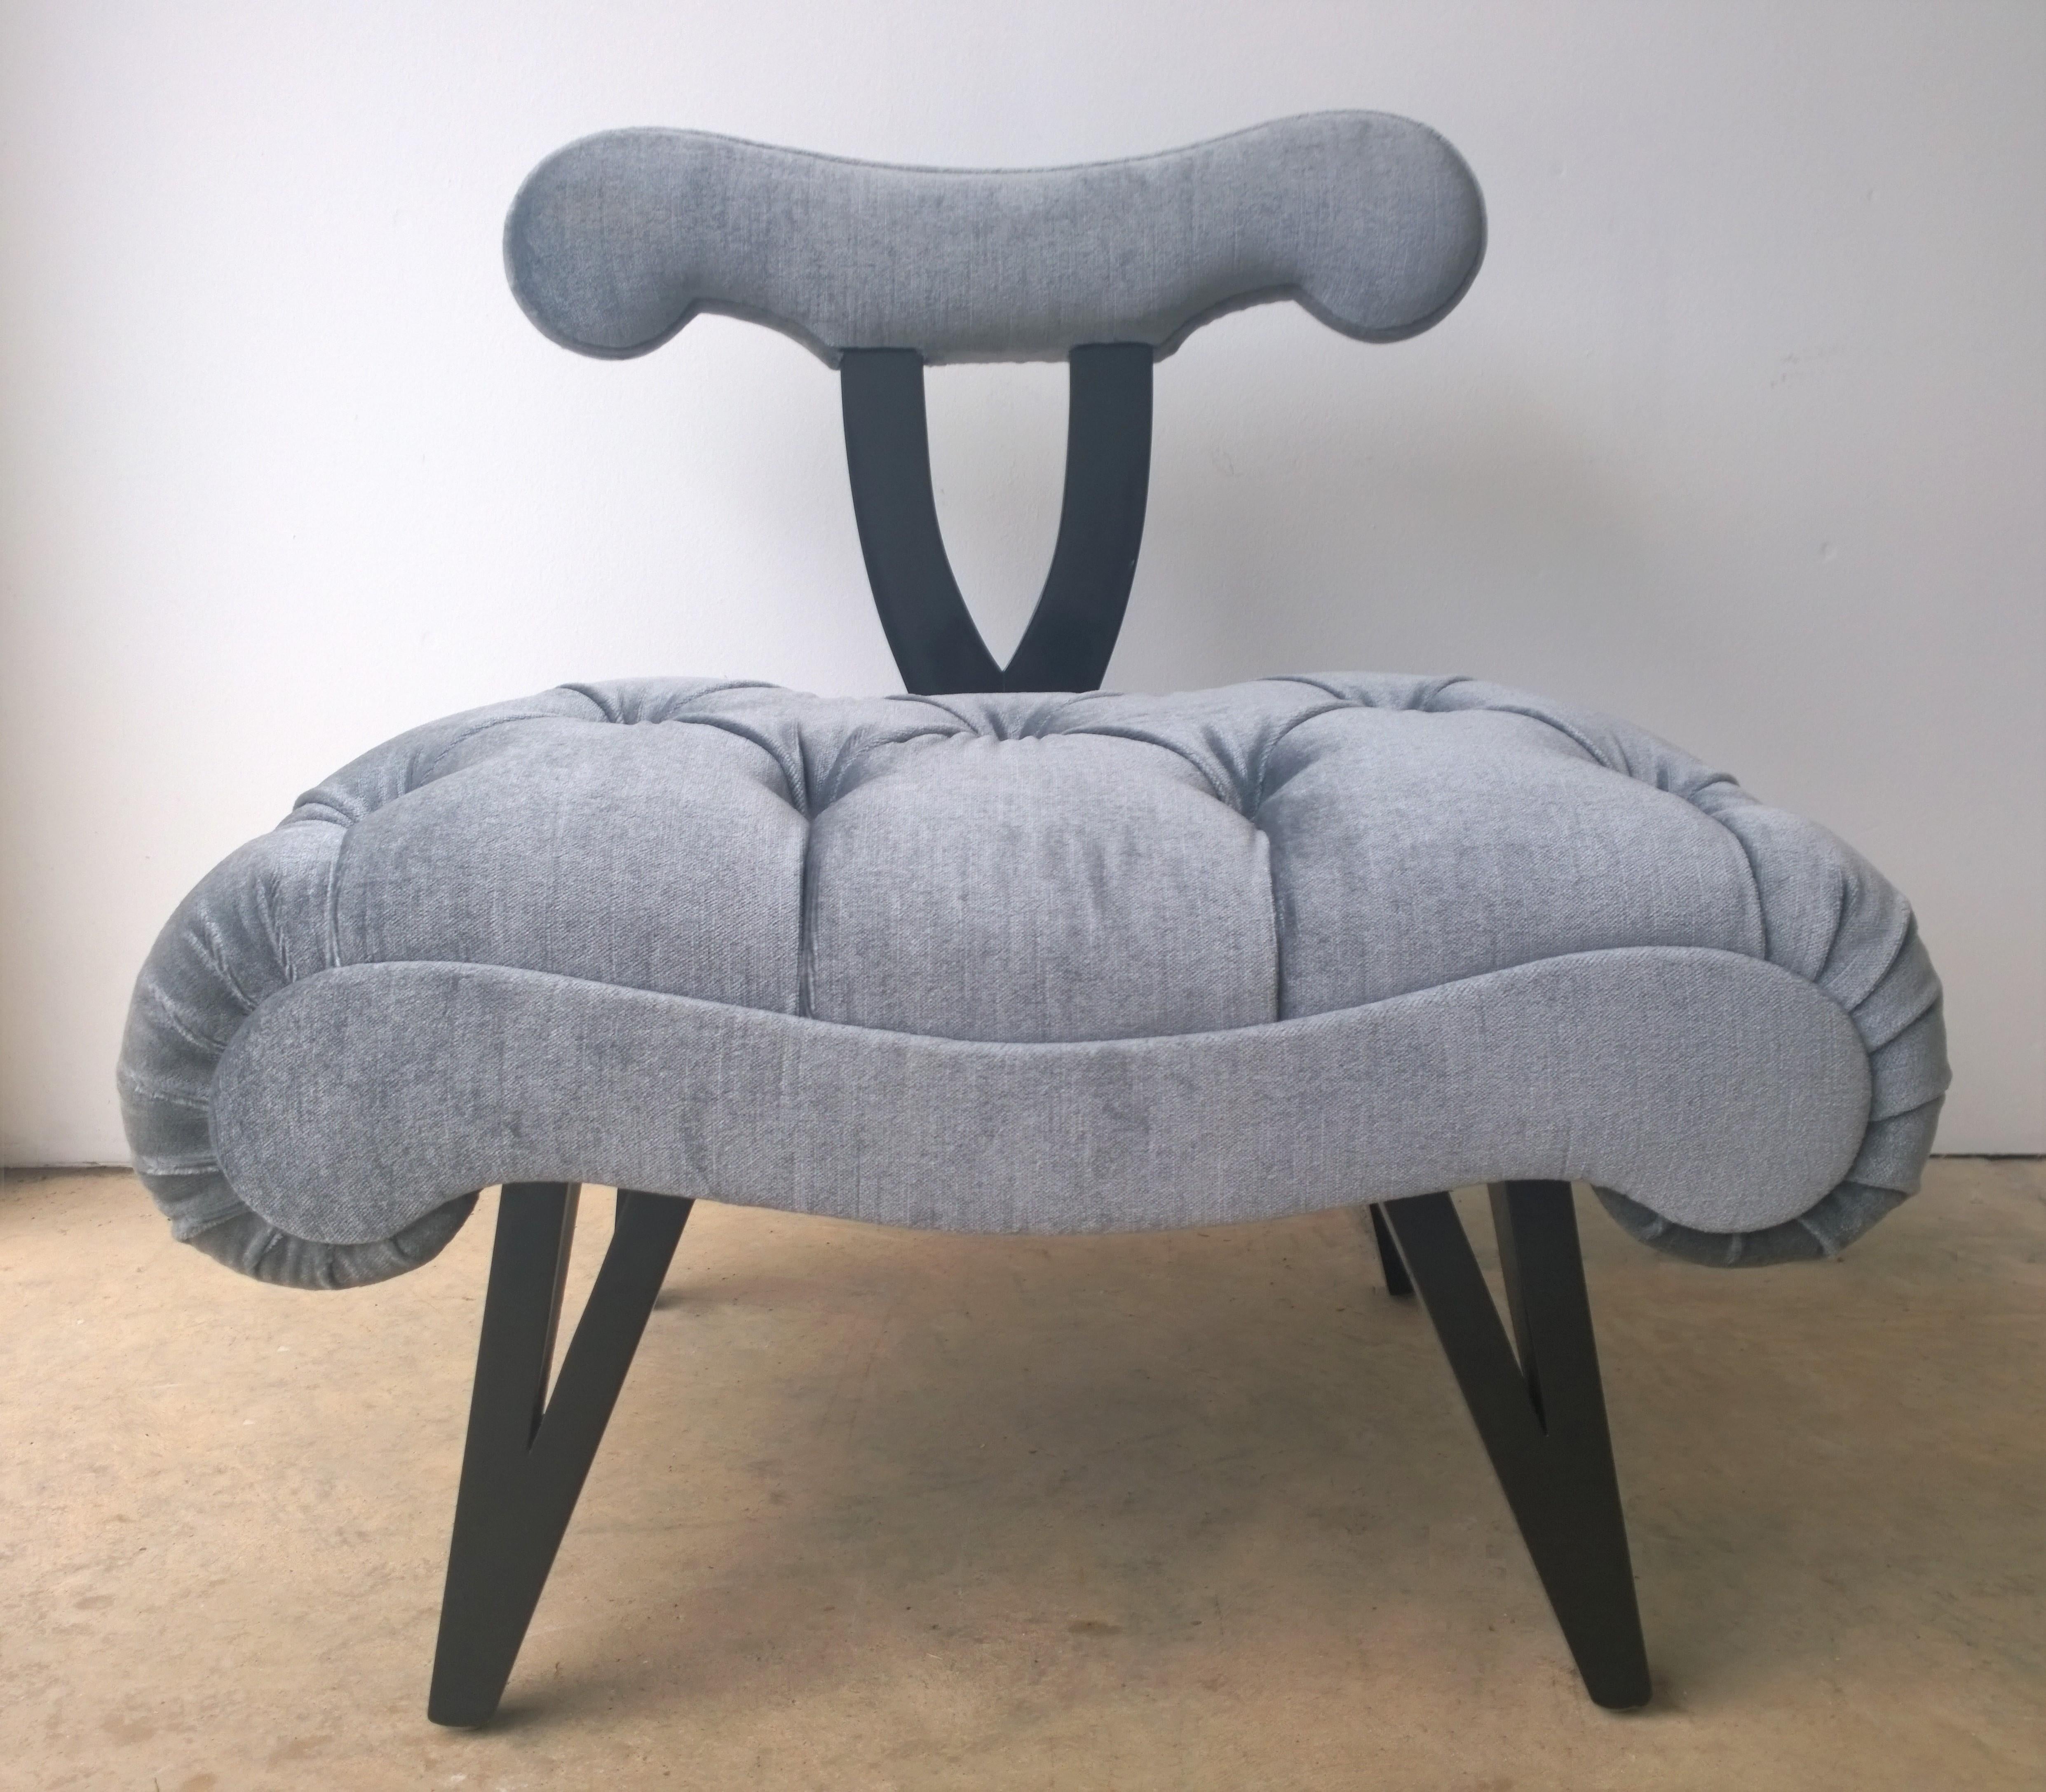 Offered is a Hollywood Regency Mid-Century Modern Grosfeld House what appears to be a refurbished slipper chair in ebonized wood and a shimmering gray tufted mohair velvet. Would look fabulous with an offered pair of Grosfeld House lacquered in